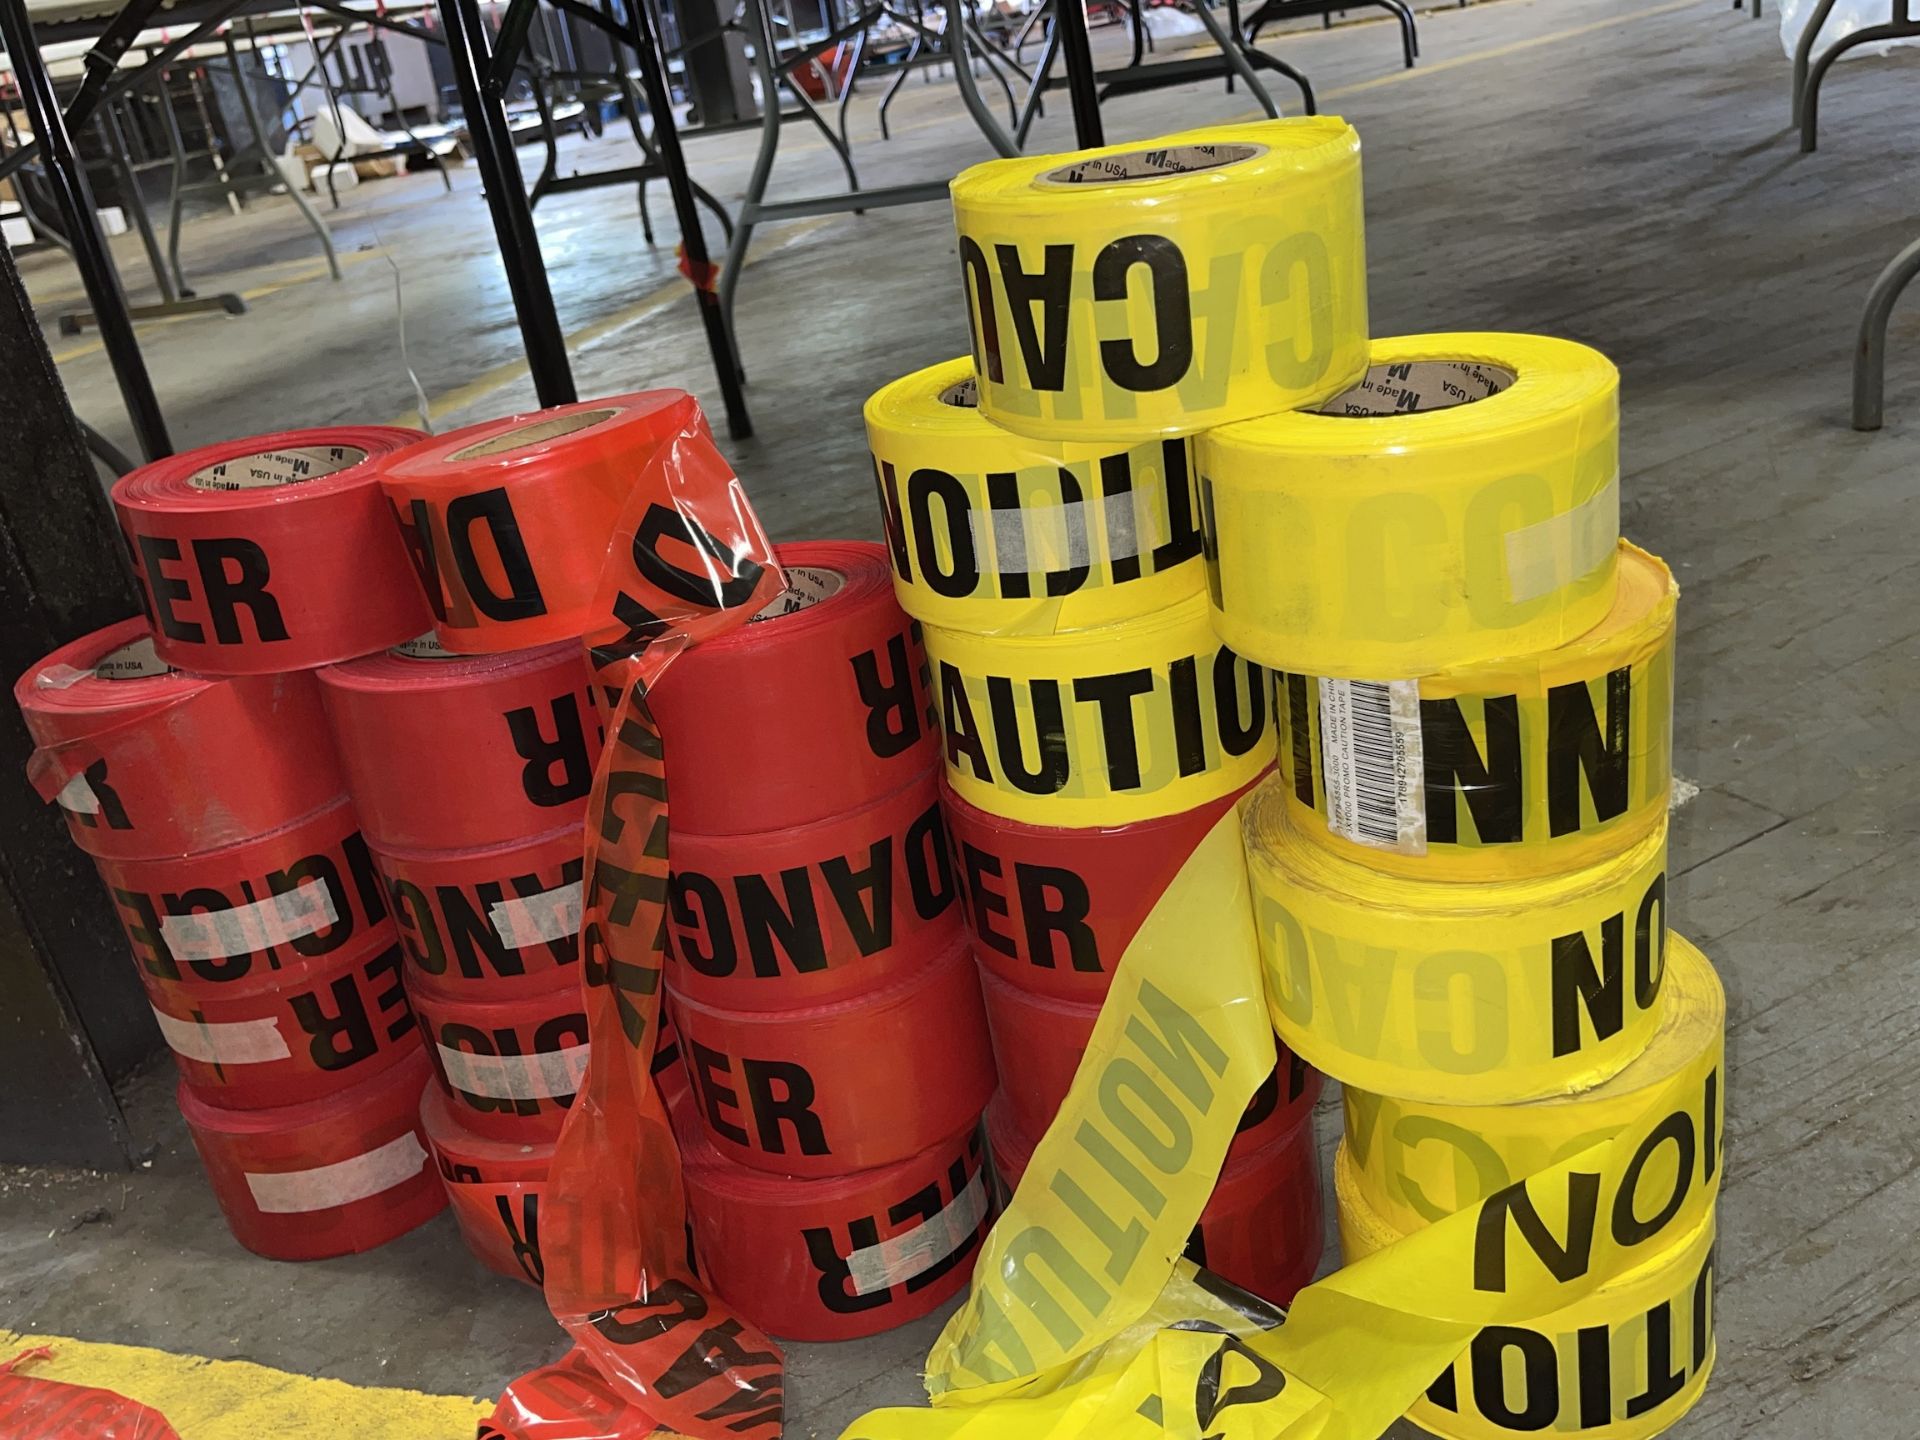 Lot of Caution Tape - Upland - Image 2 of 3